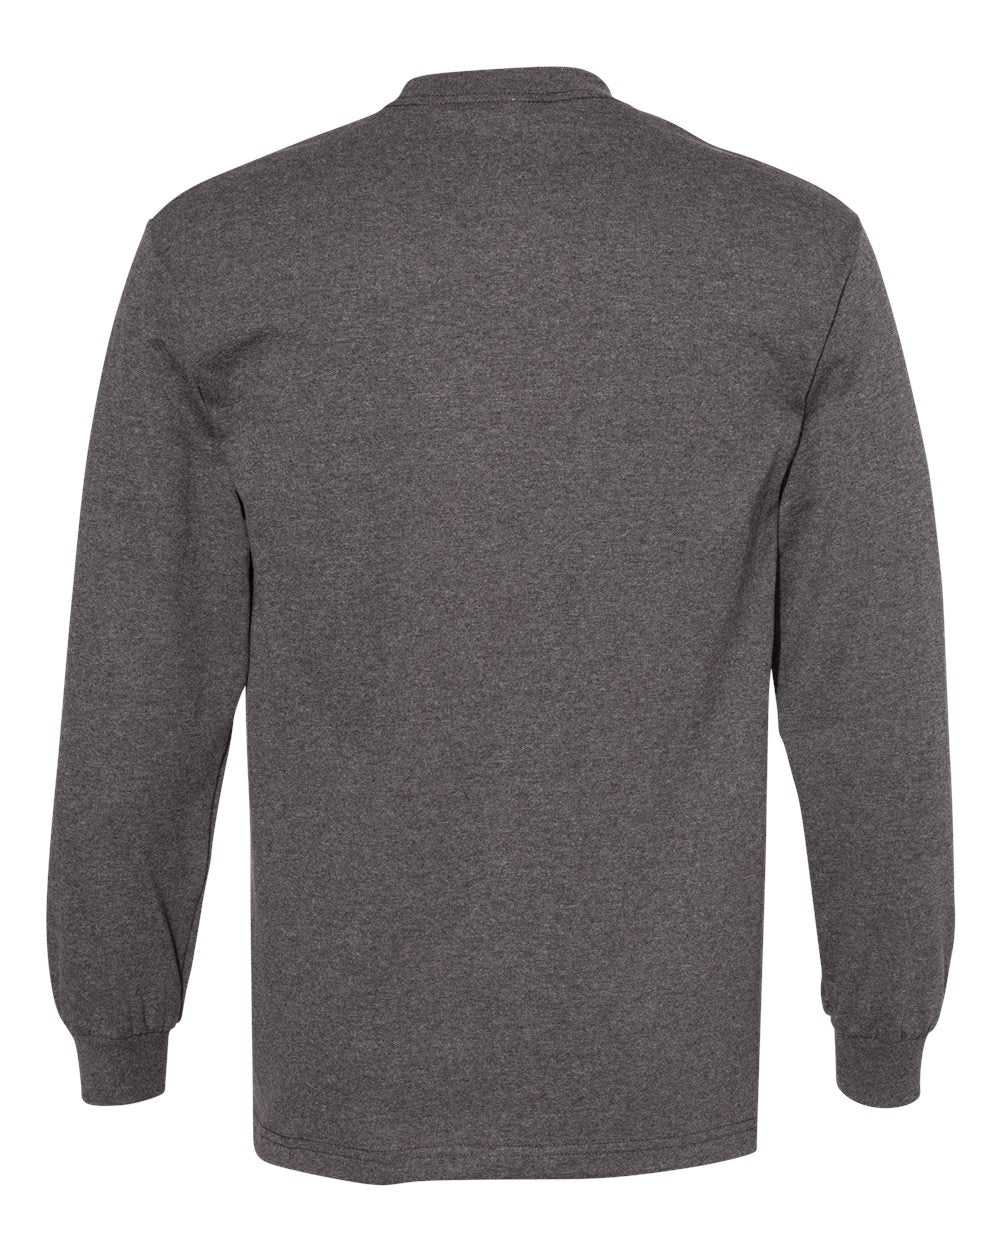 American Apparel 1304 Unisex Heavyweight Cotton Long Sleeve T-Shirt - Charcoal Heather - HIT a Double